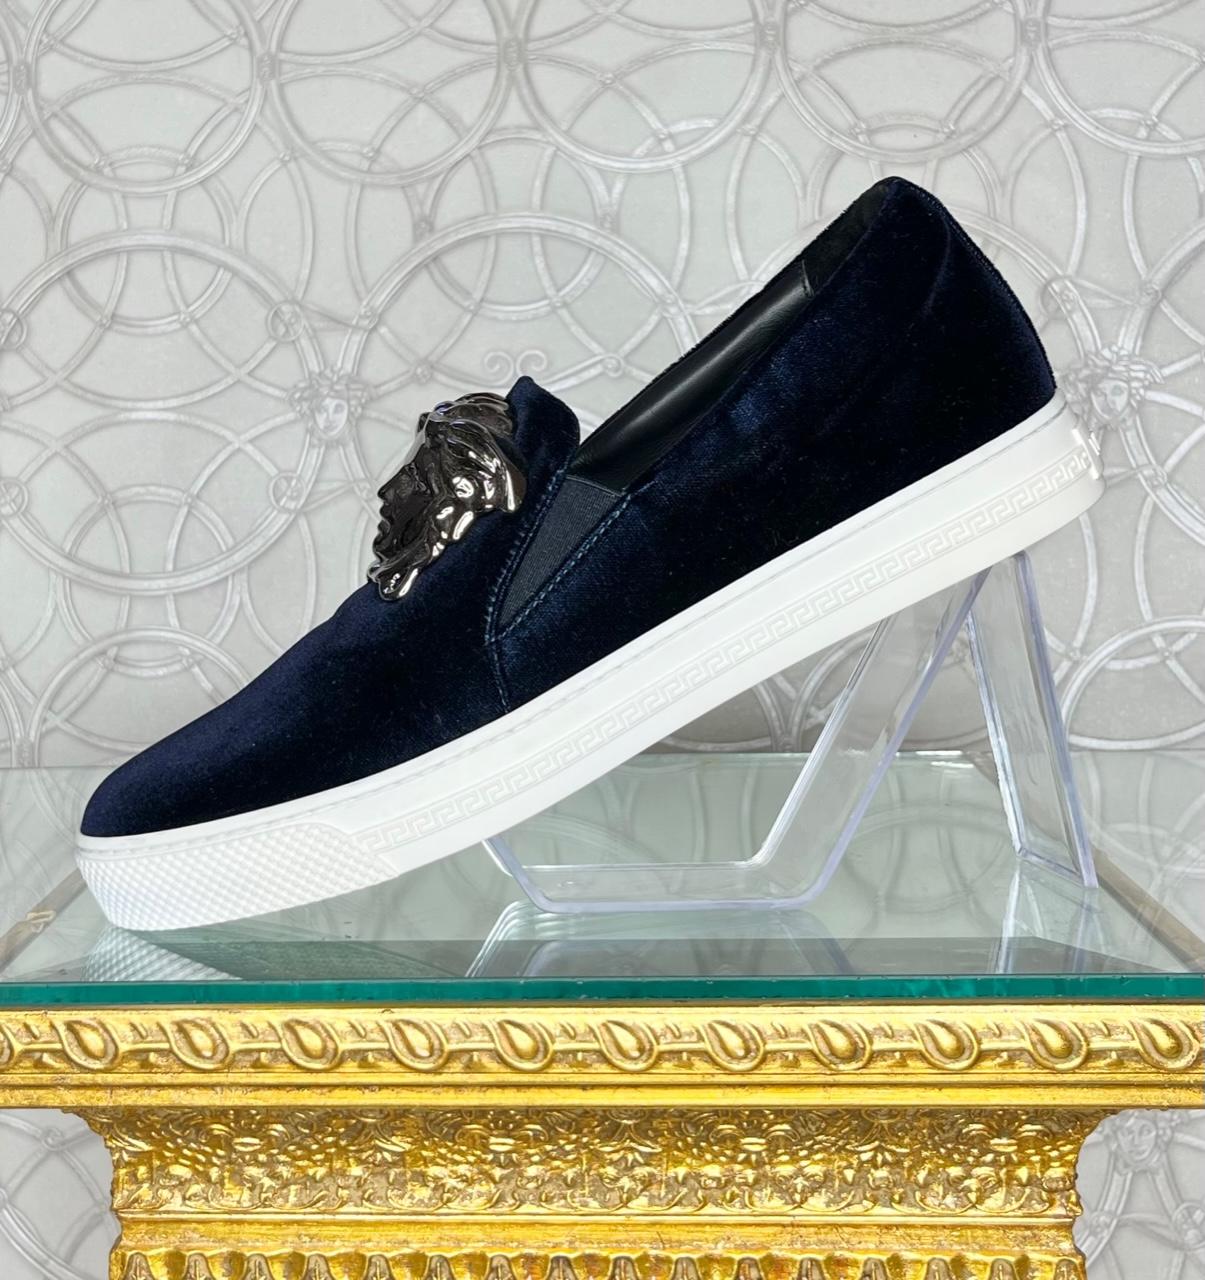 VERSACE

Versace Velvet slip on sneakers
Navy blue
Round-Toes
Rubber white sole
Signature 3D MEDUSA hardware

Content: velvet

Lining: 100% leather
Rubber sole

Made in Italy

Italian Size is 42 - US 9
       

Brand new. Comes with Versace box and